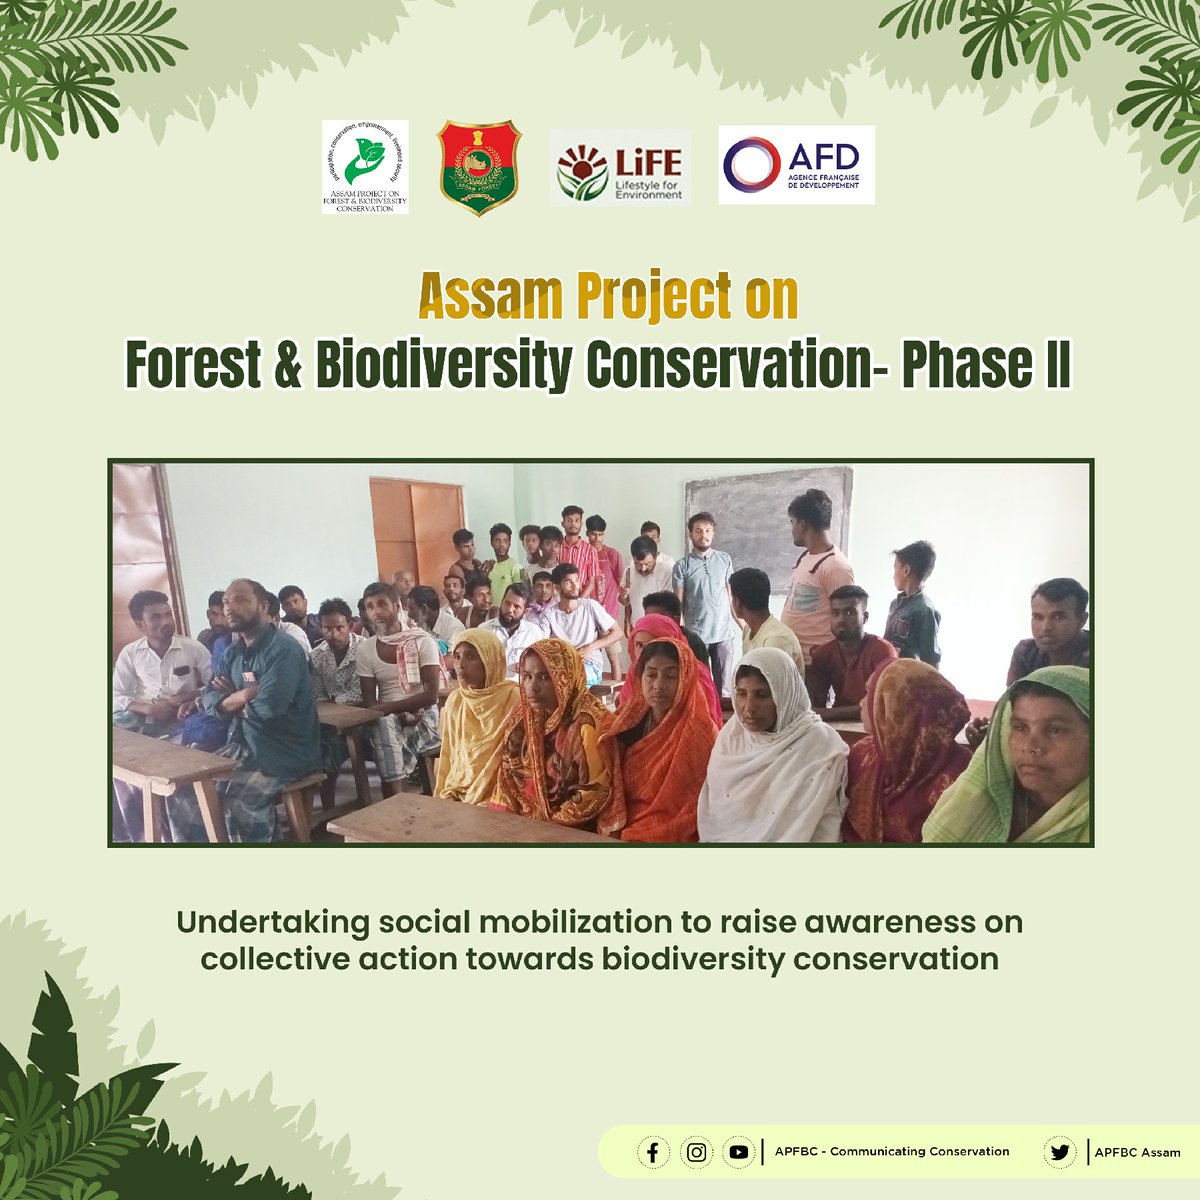 Focus group discussions are held with the forest fringe communities for raising awareness on #genderequality and #social #inclusion to encourage collective participation towards conservation and sustainable development.
#conservation #community #Assam 

@cmpatowary 
@mkyadava